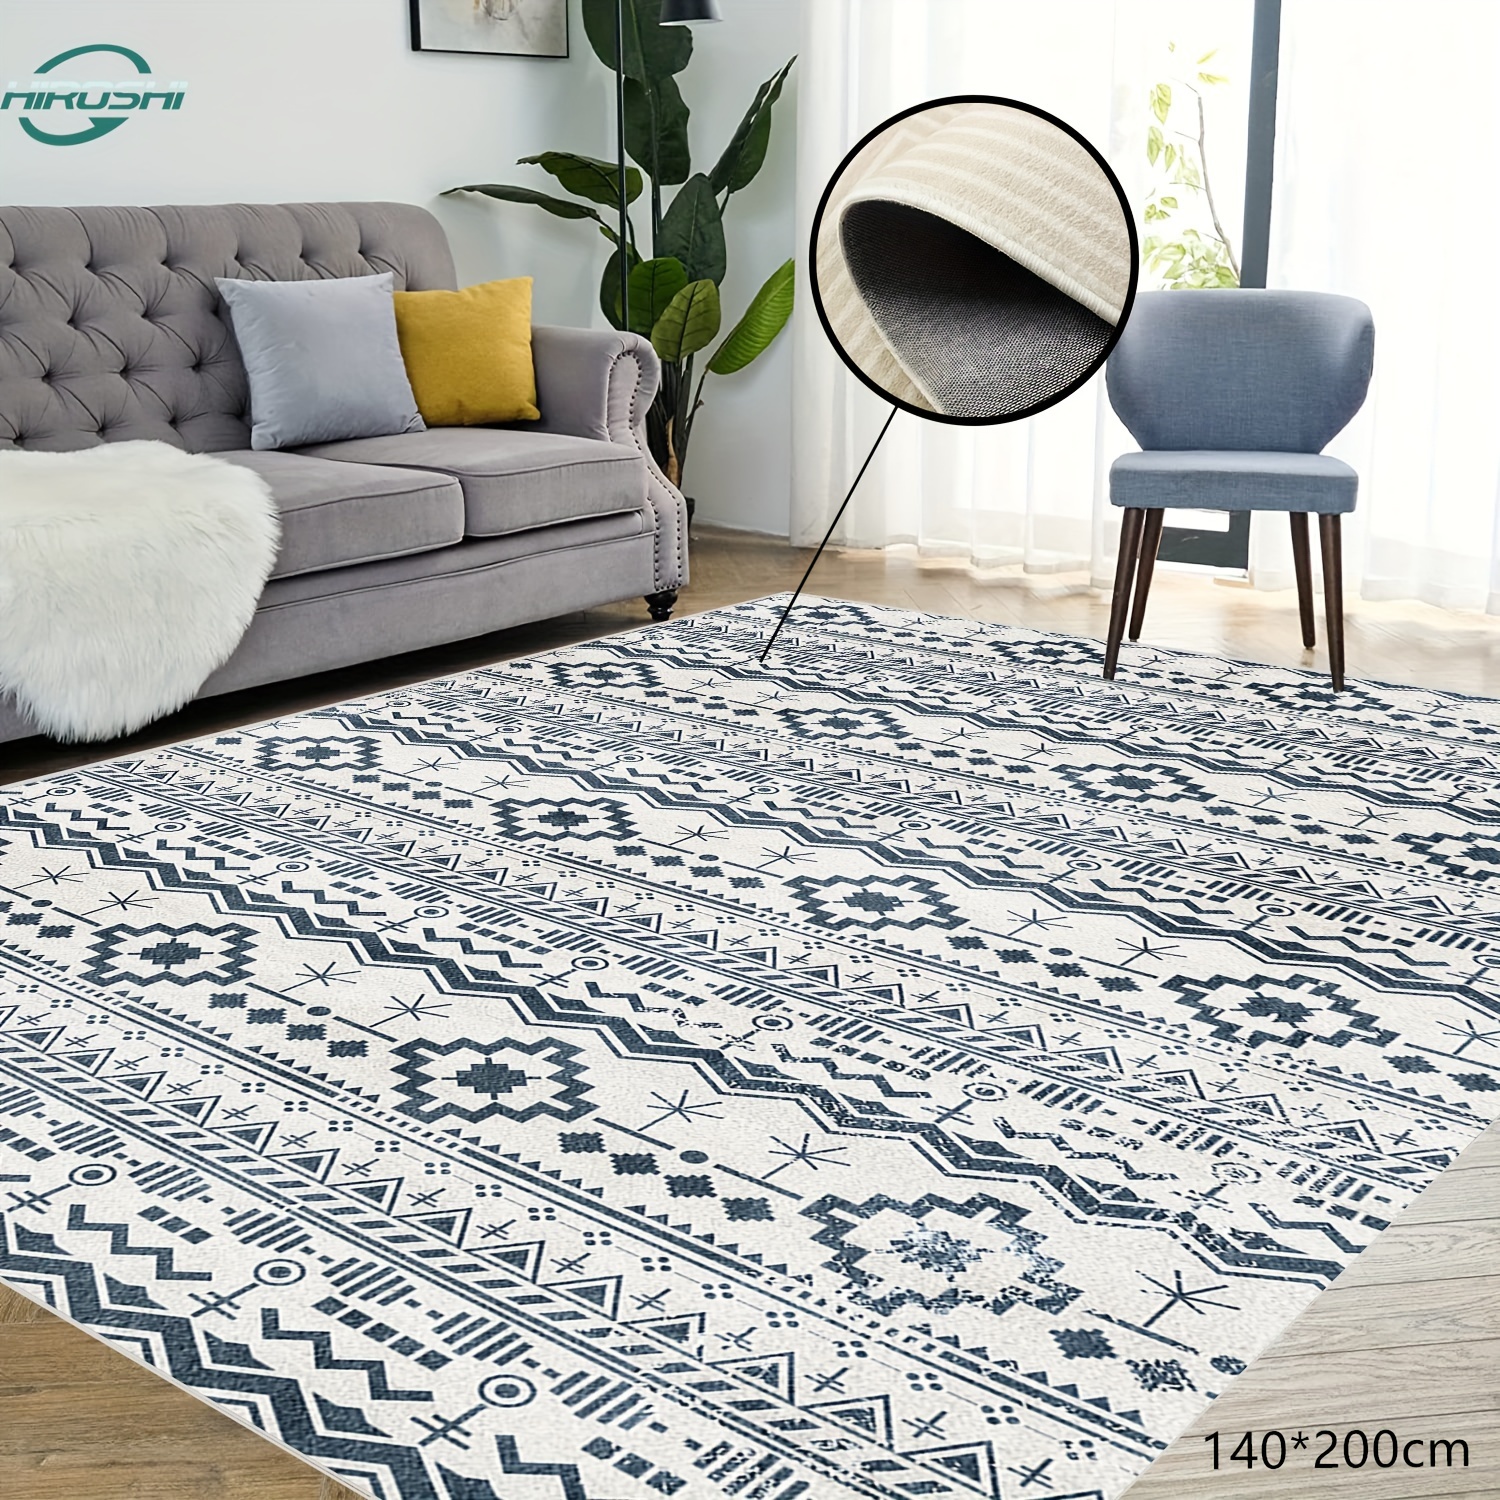 Debao Washable Area Rugs 8x10 - Large Rugs For Living Room Non-Slip  Non-Shedding Thin Carpet For Bedroom Kitchen Stain And Water Resistant  Indoor Carpets Black, 8x10